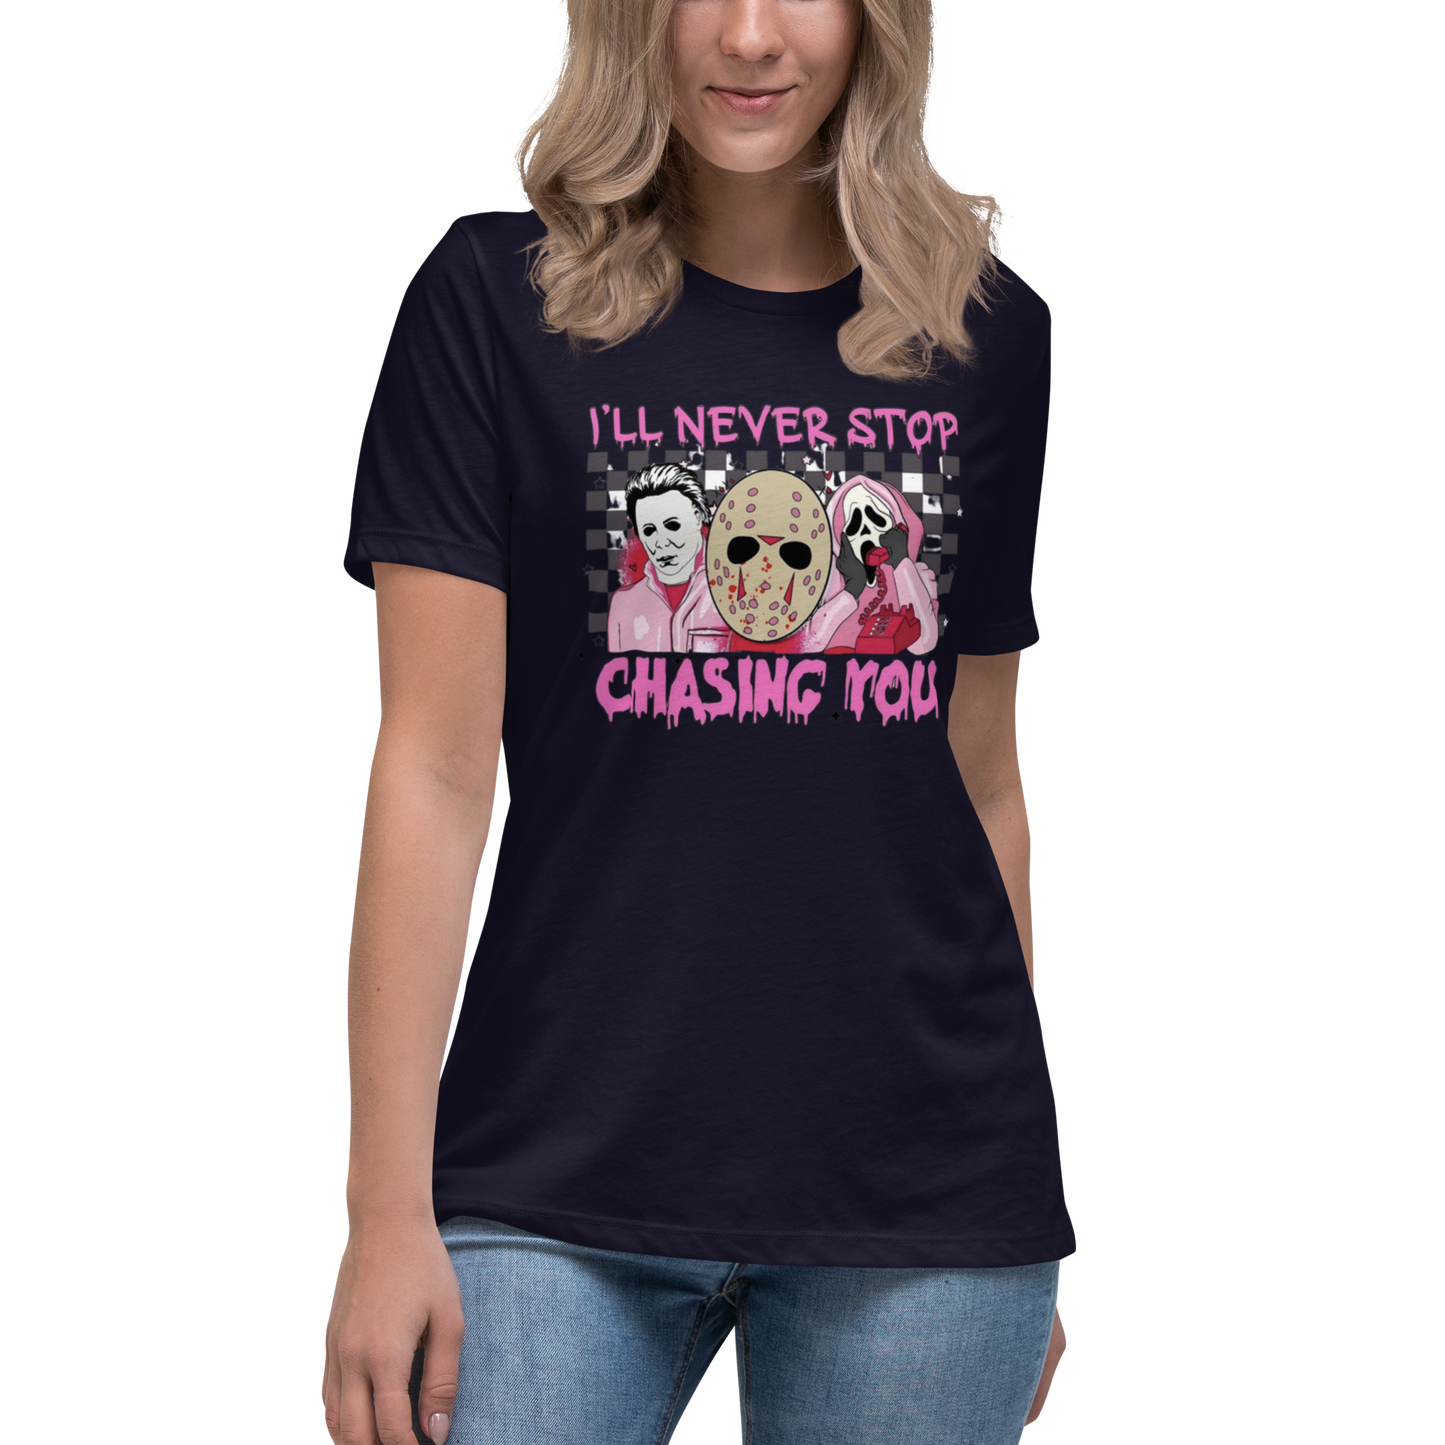 Ill Never Stop Chasing You tshirt